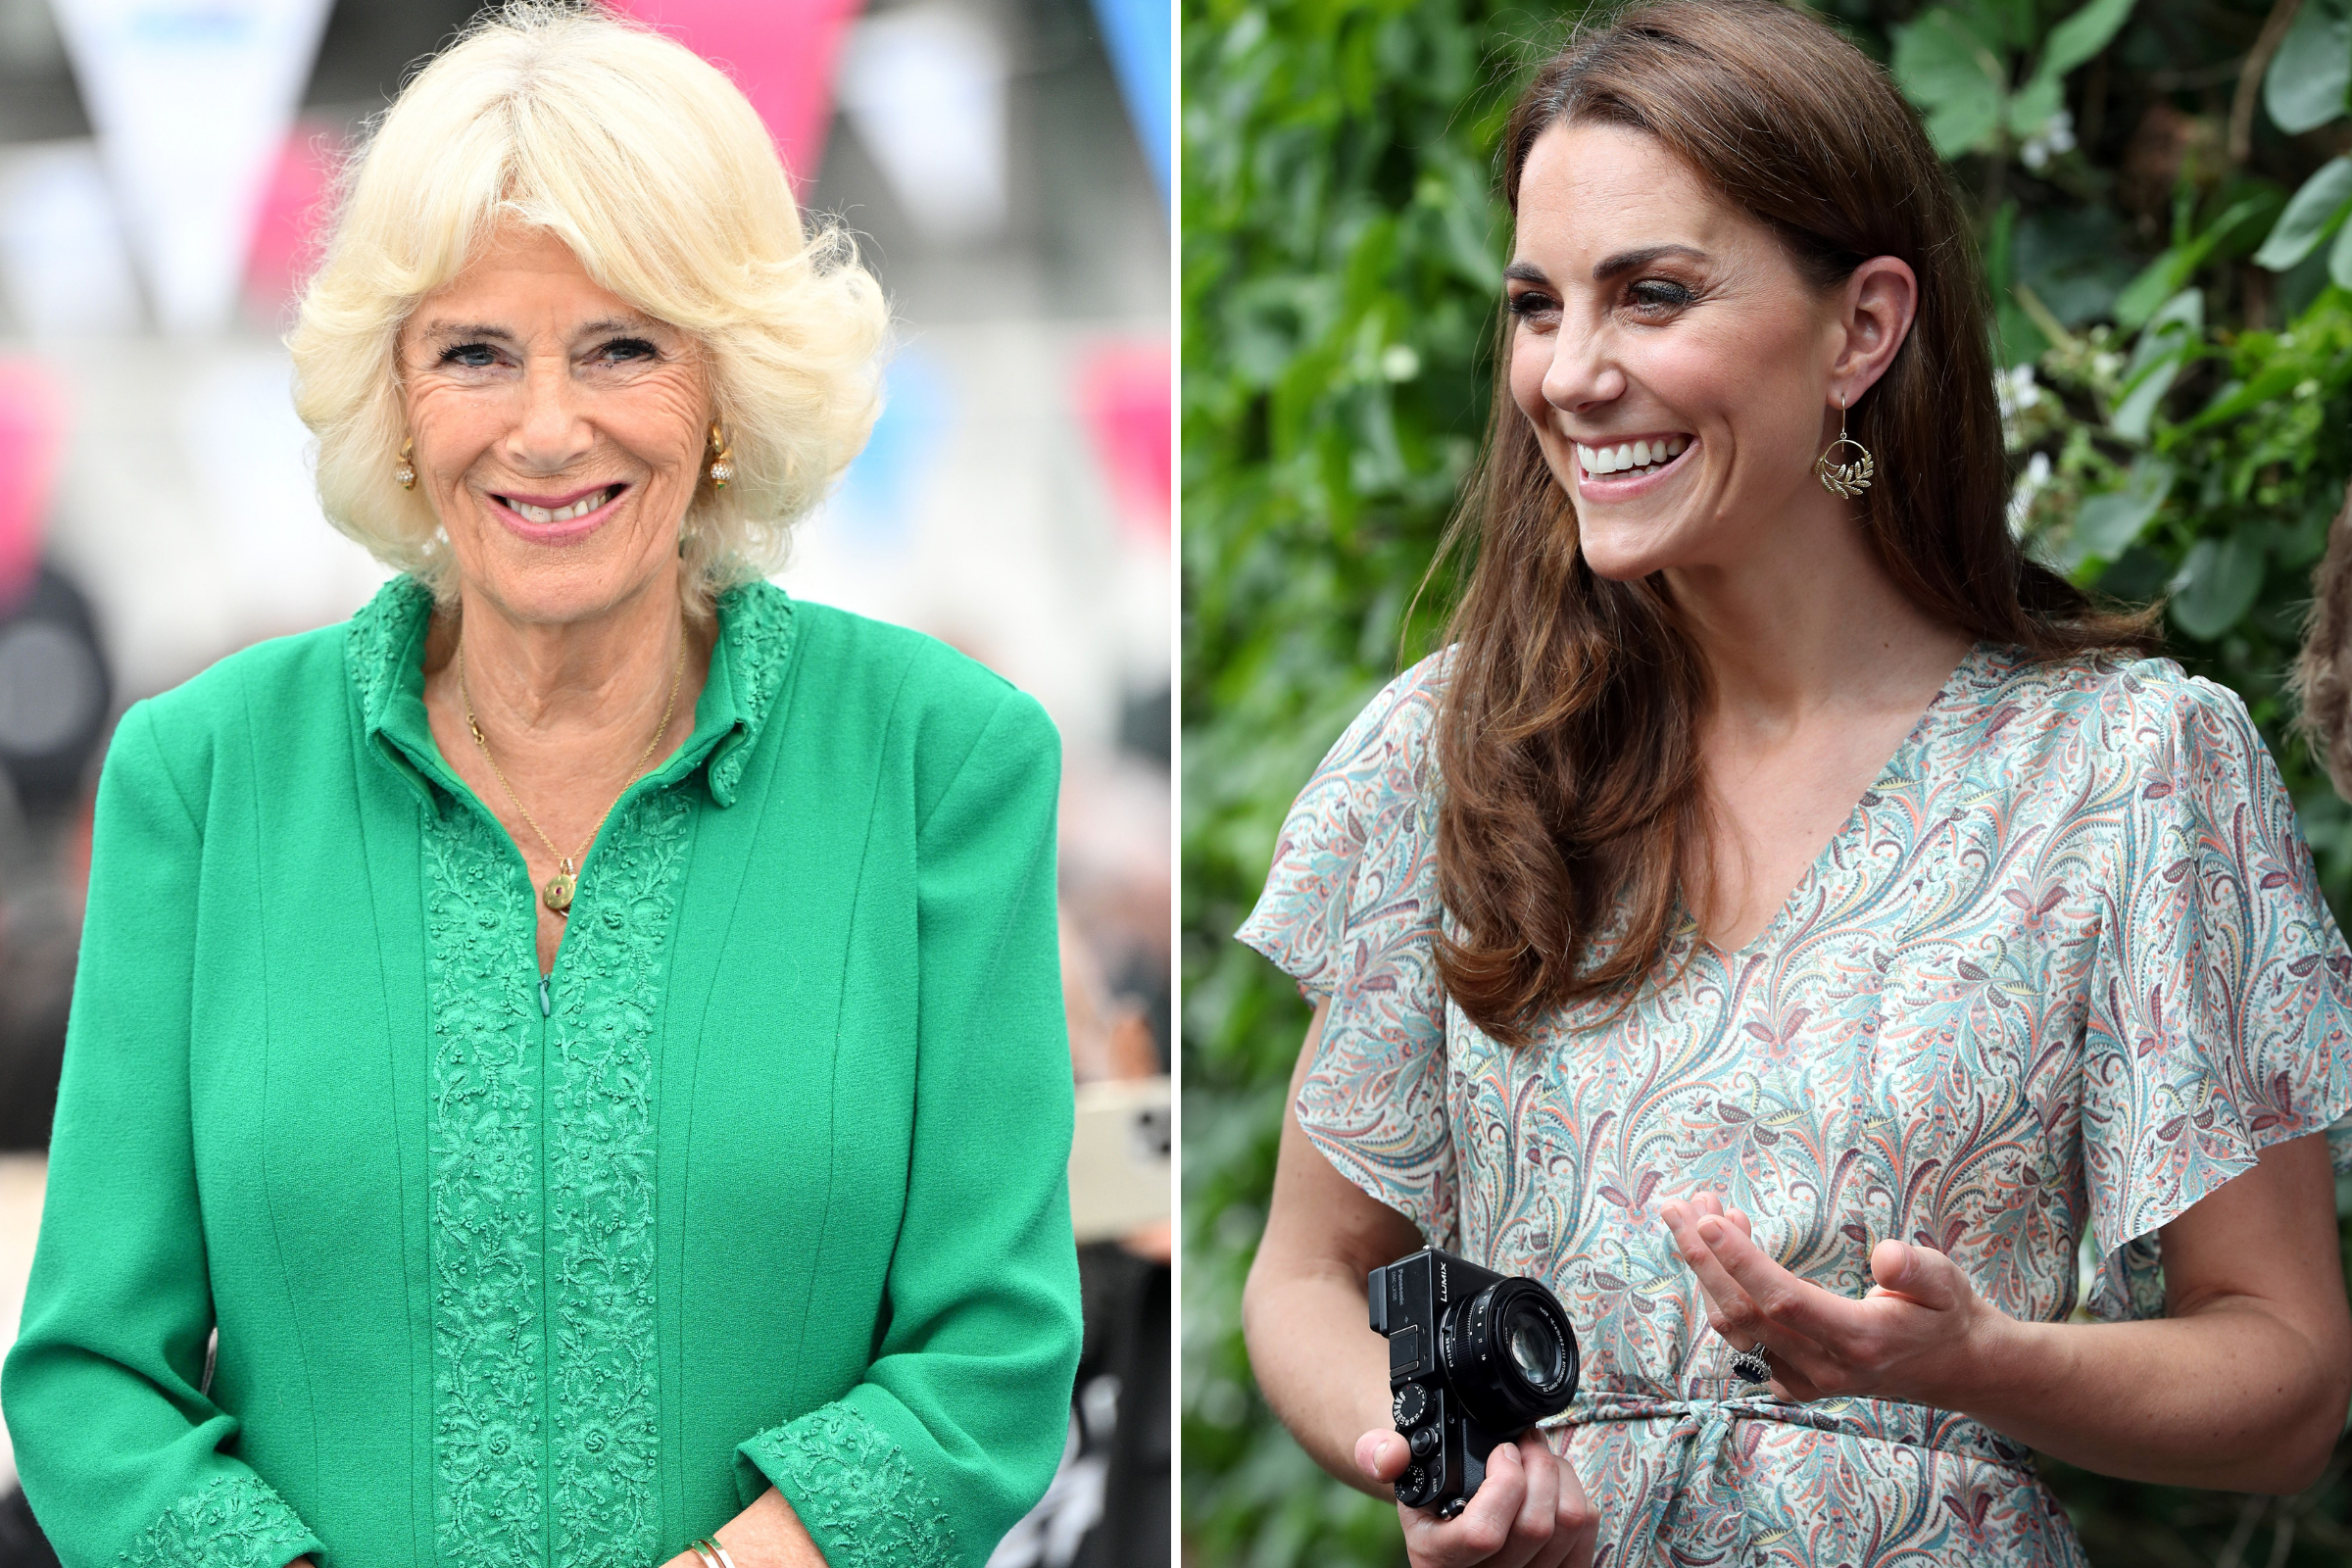 Camilla Asked Kate To Shoot Portrait: 'I'd Quite Like Catherine Do It'